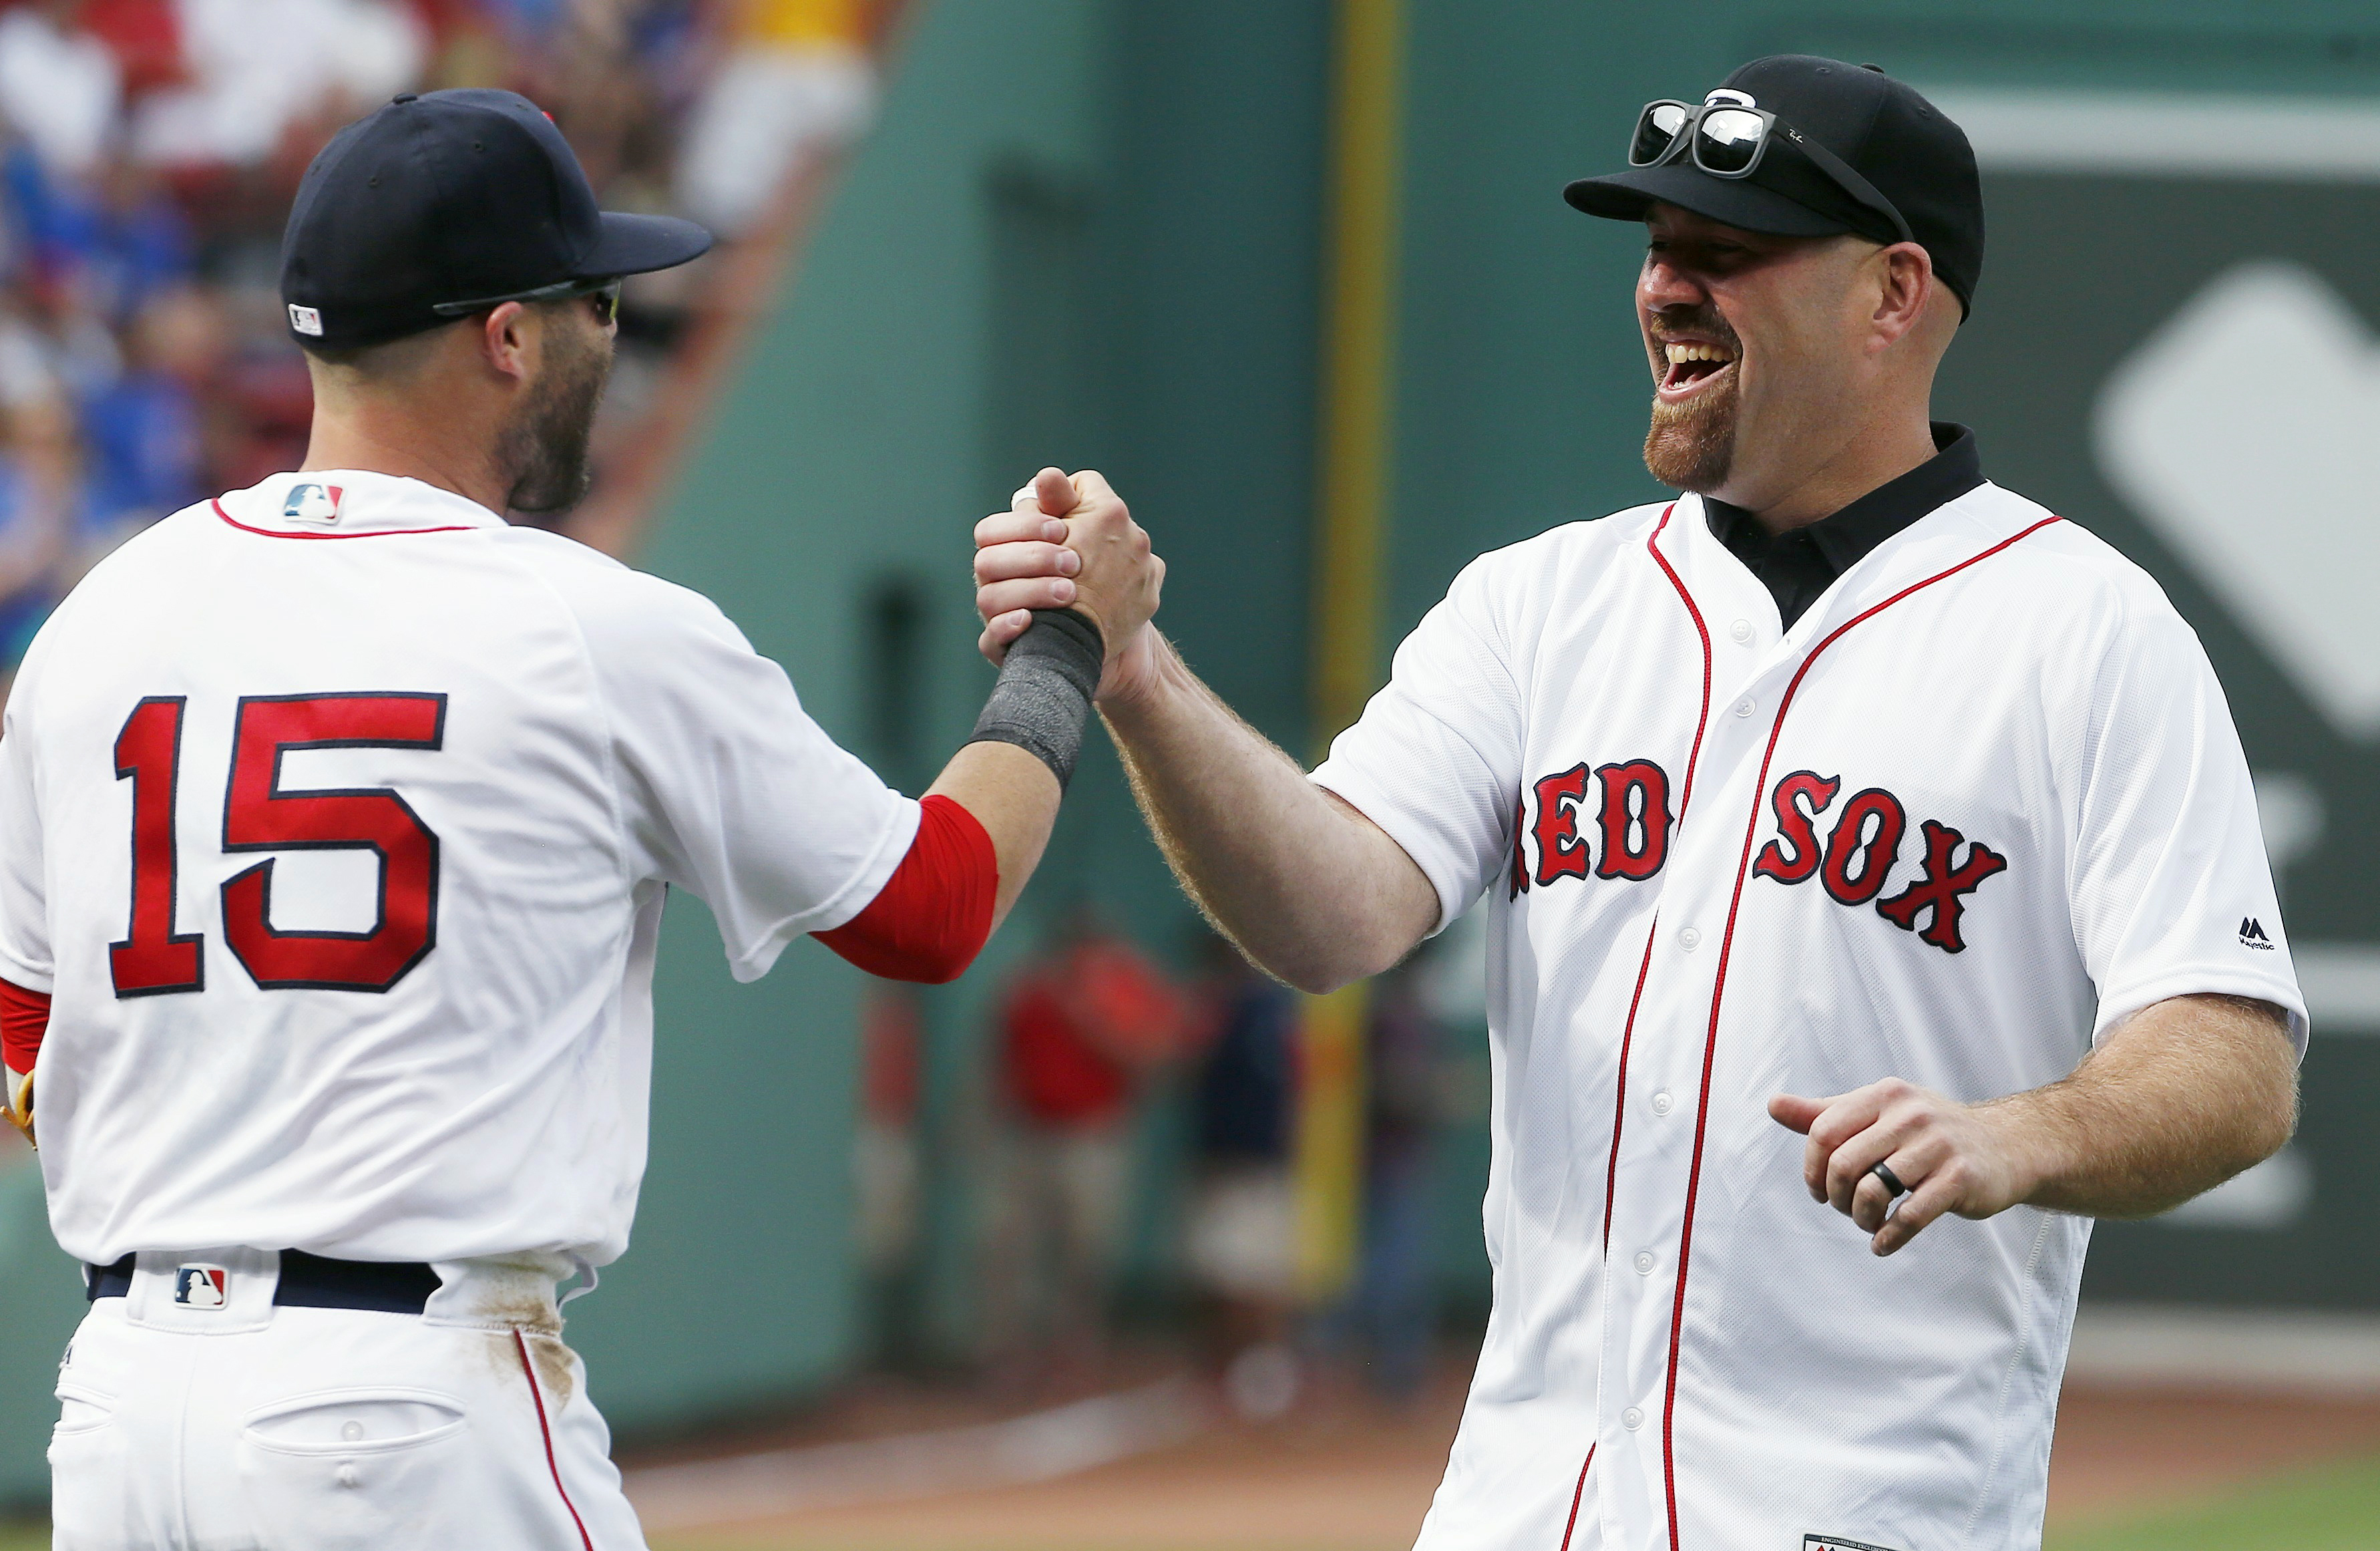 Kevin Youkilis Is In Boston to Launch His Beer Here This Week